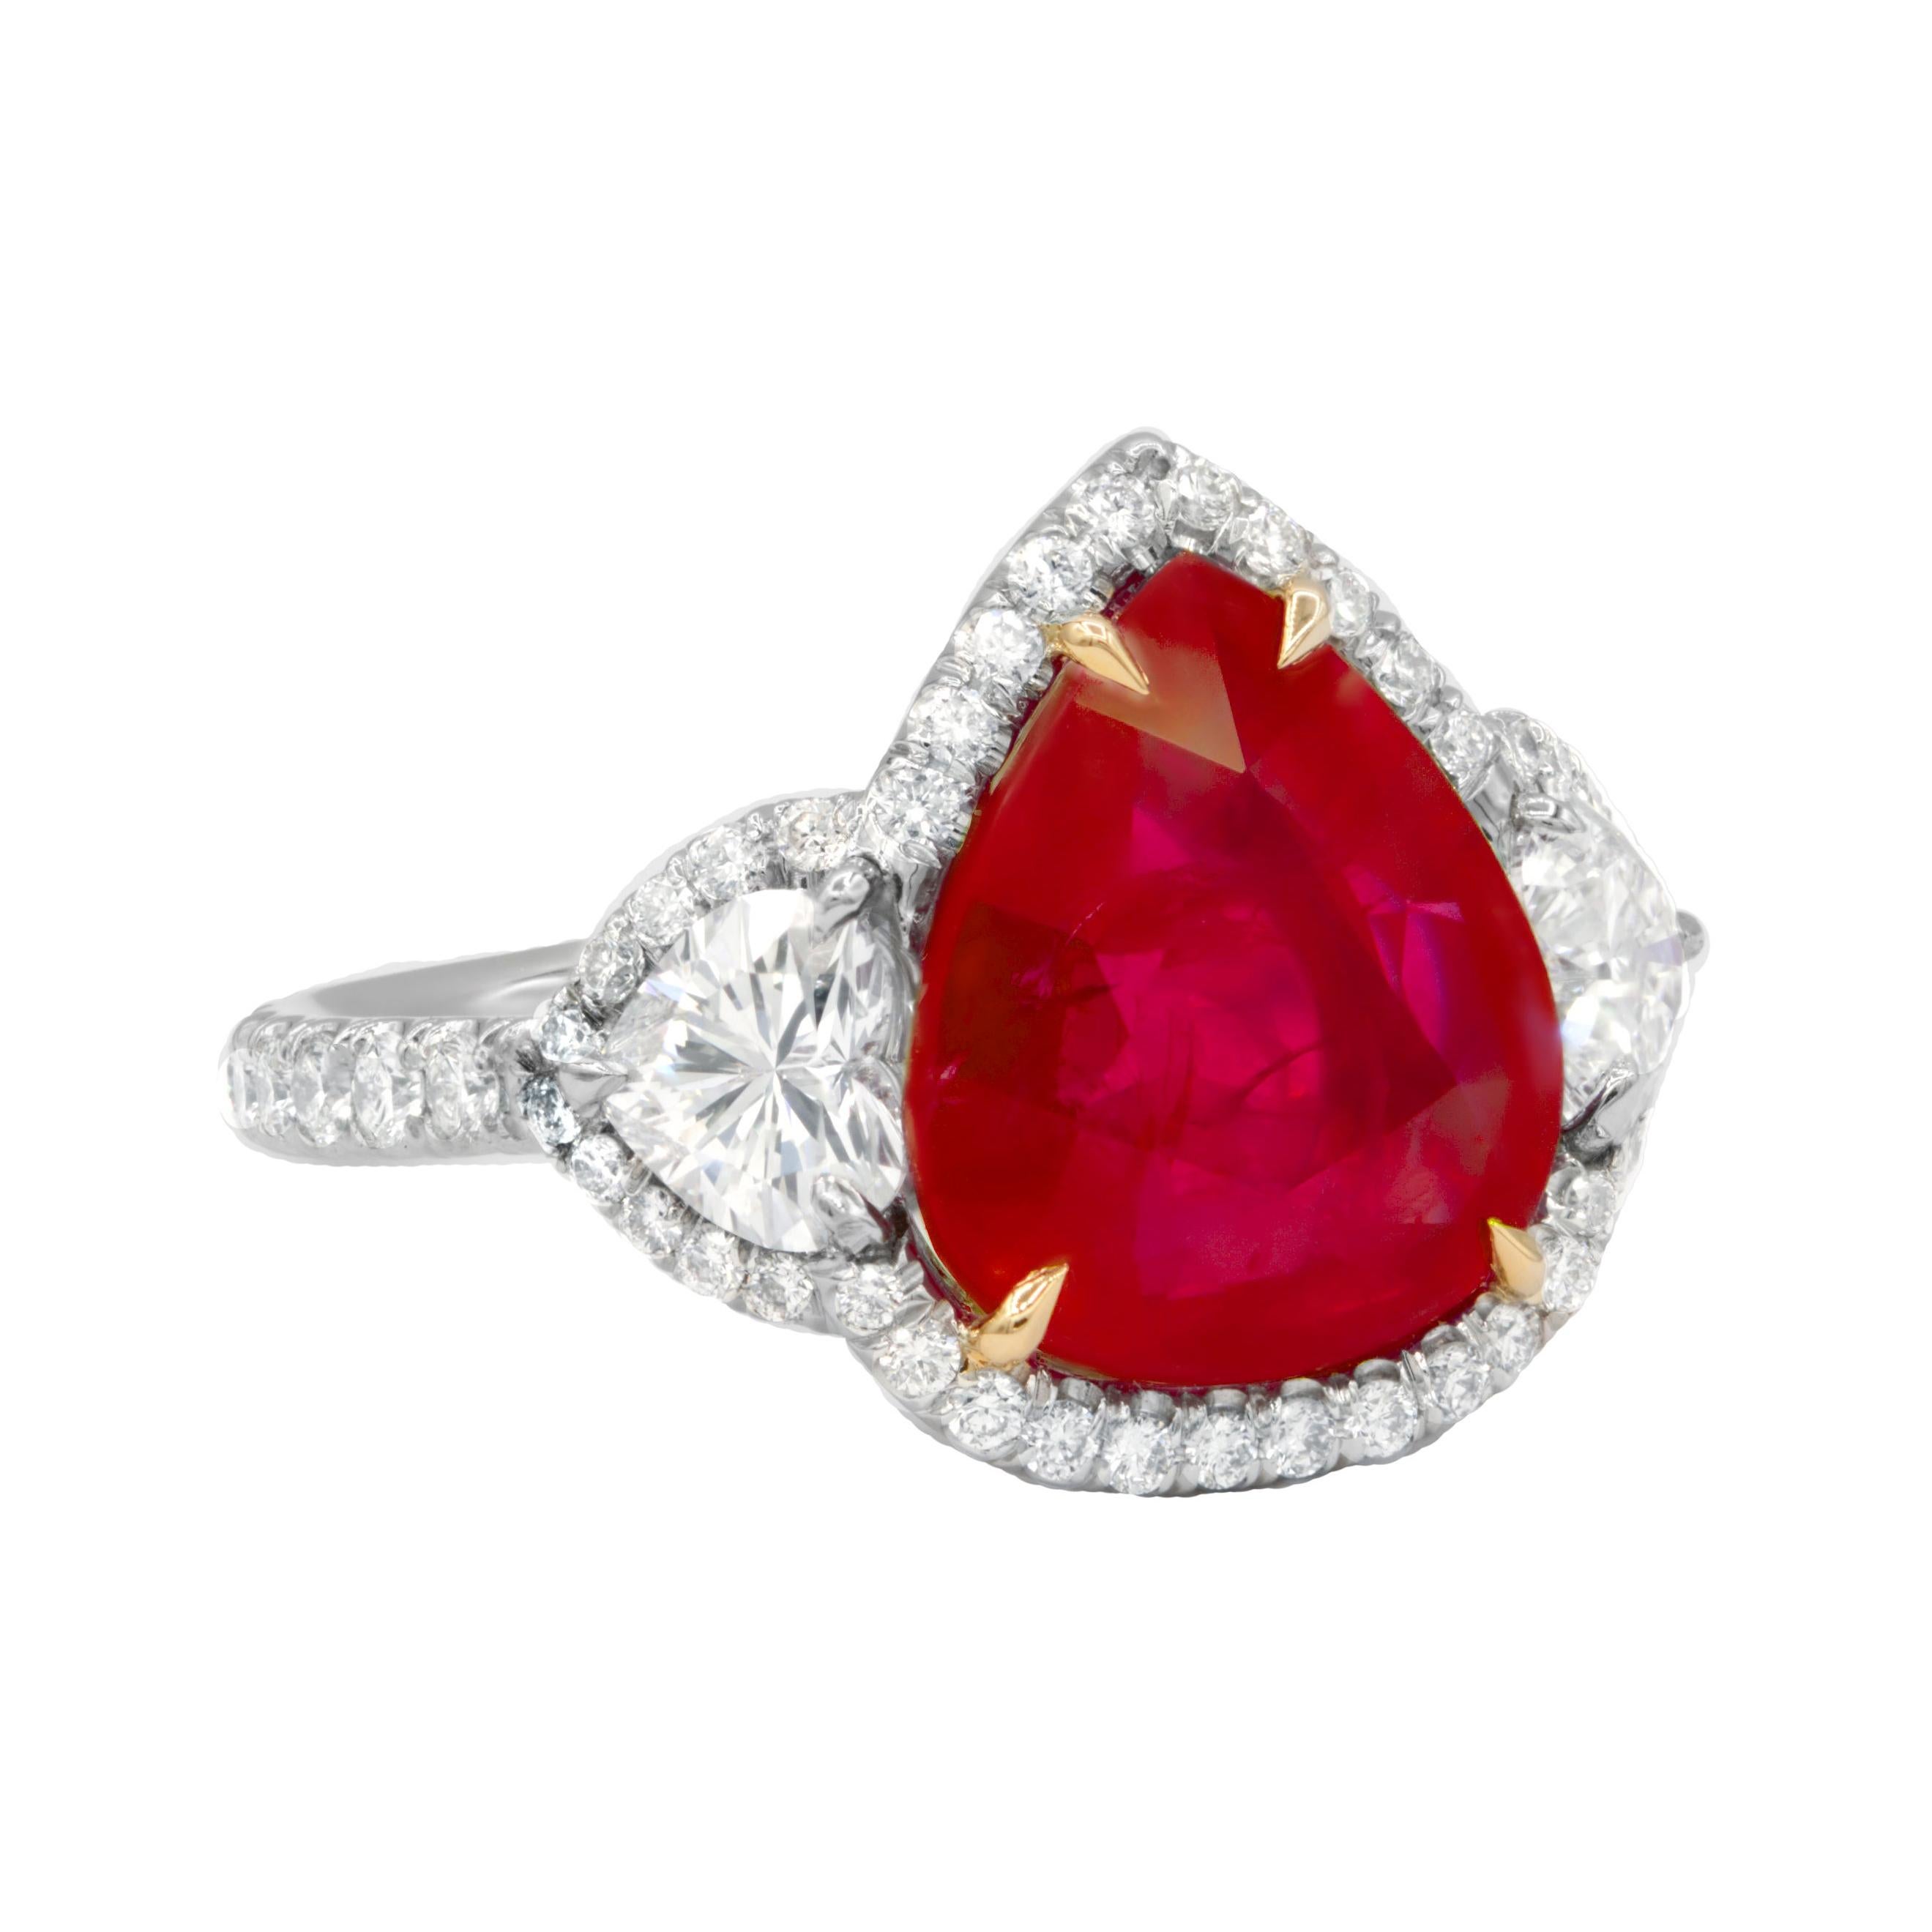 Magnificent combination of Ruby with heart shaped diamonds makes this ring spectacular! 
The center stone is 6.27 Carat Pear Shape ruby certified by GIA and set with two hearts on each side surrounded by round brilliant cut diamonds totaling 1.70